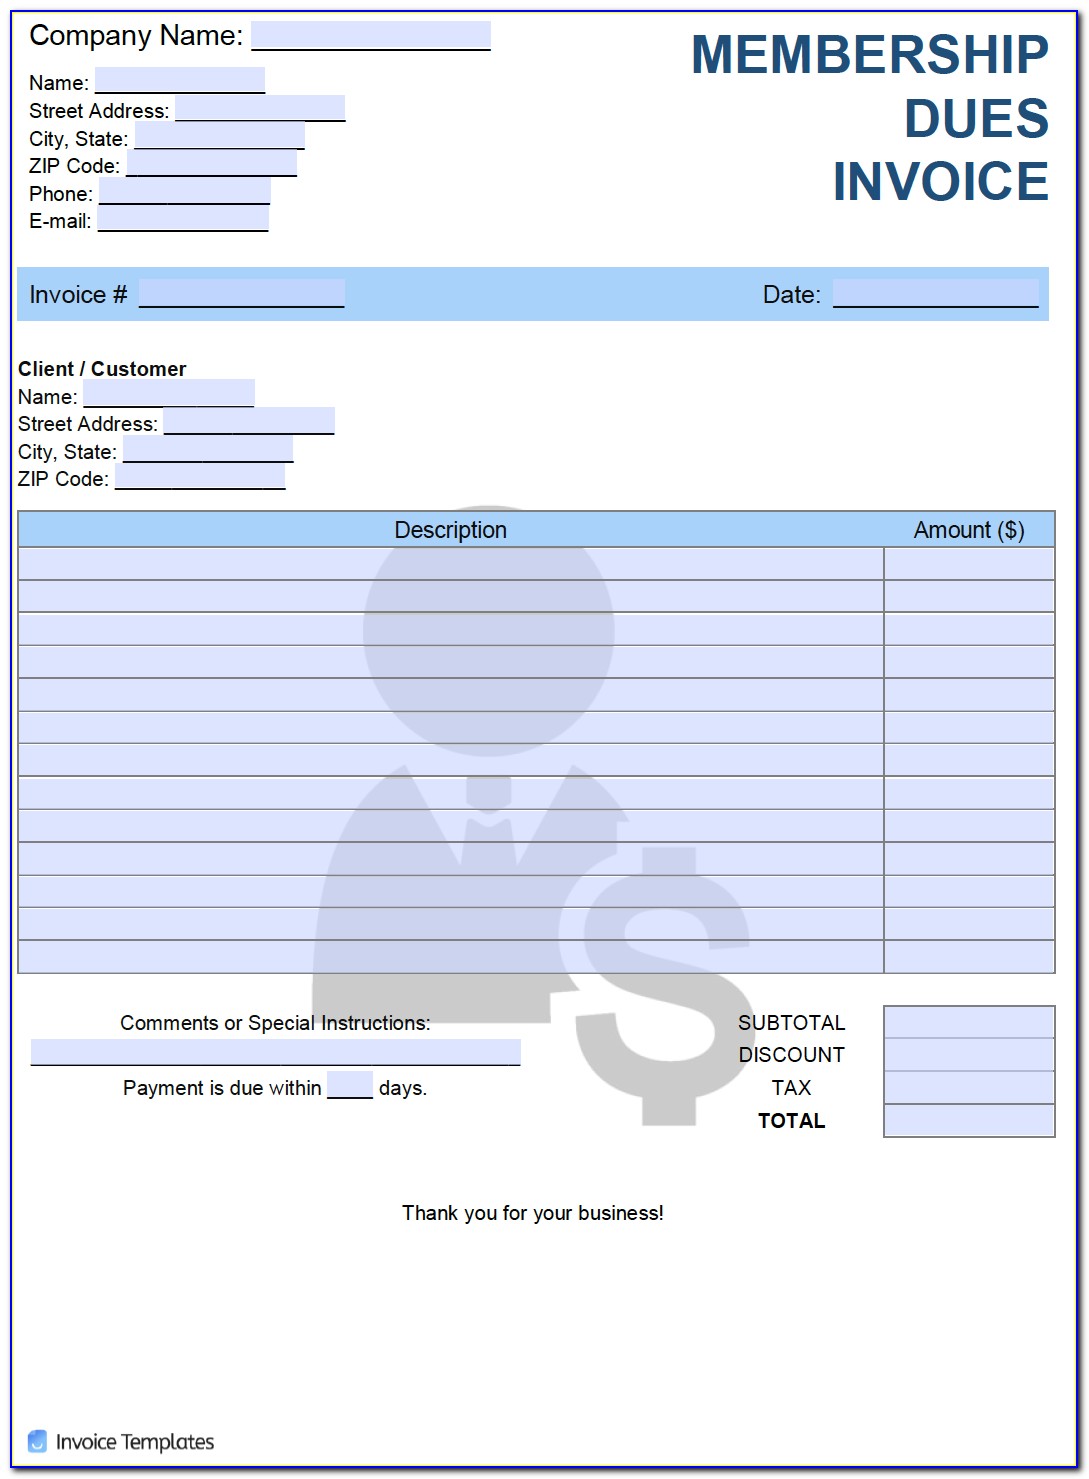 Dues Invoice Template